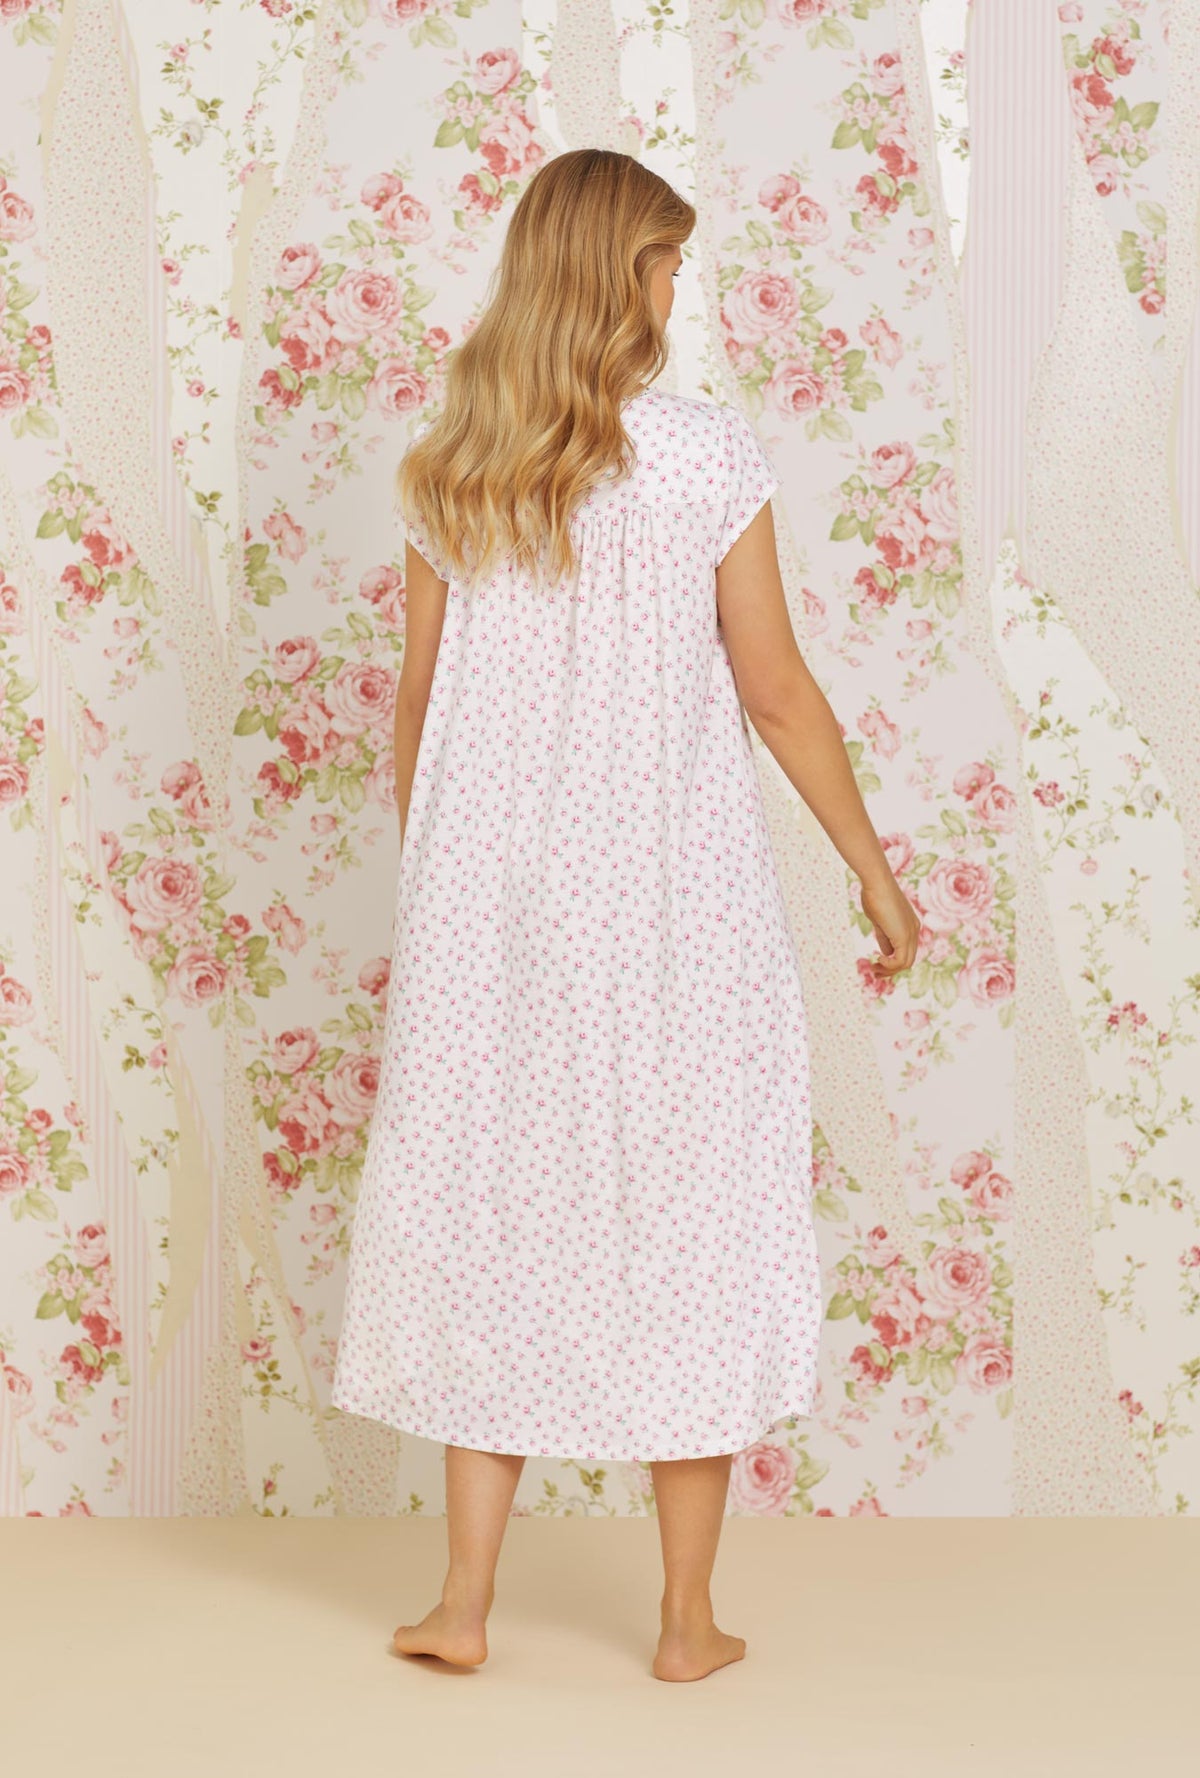 A lady wearing pink cap sleeve cotton knit nightgown with joyful rose print.